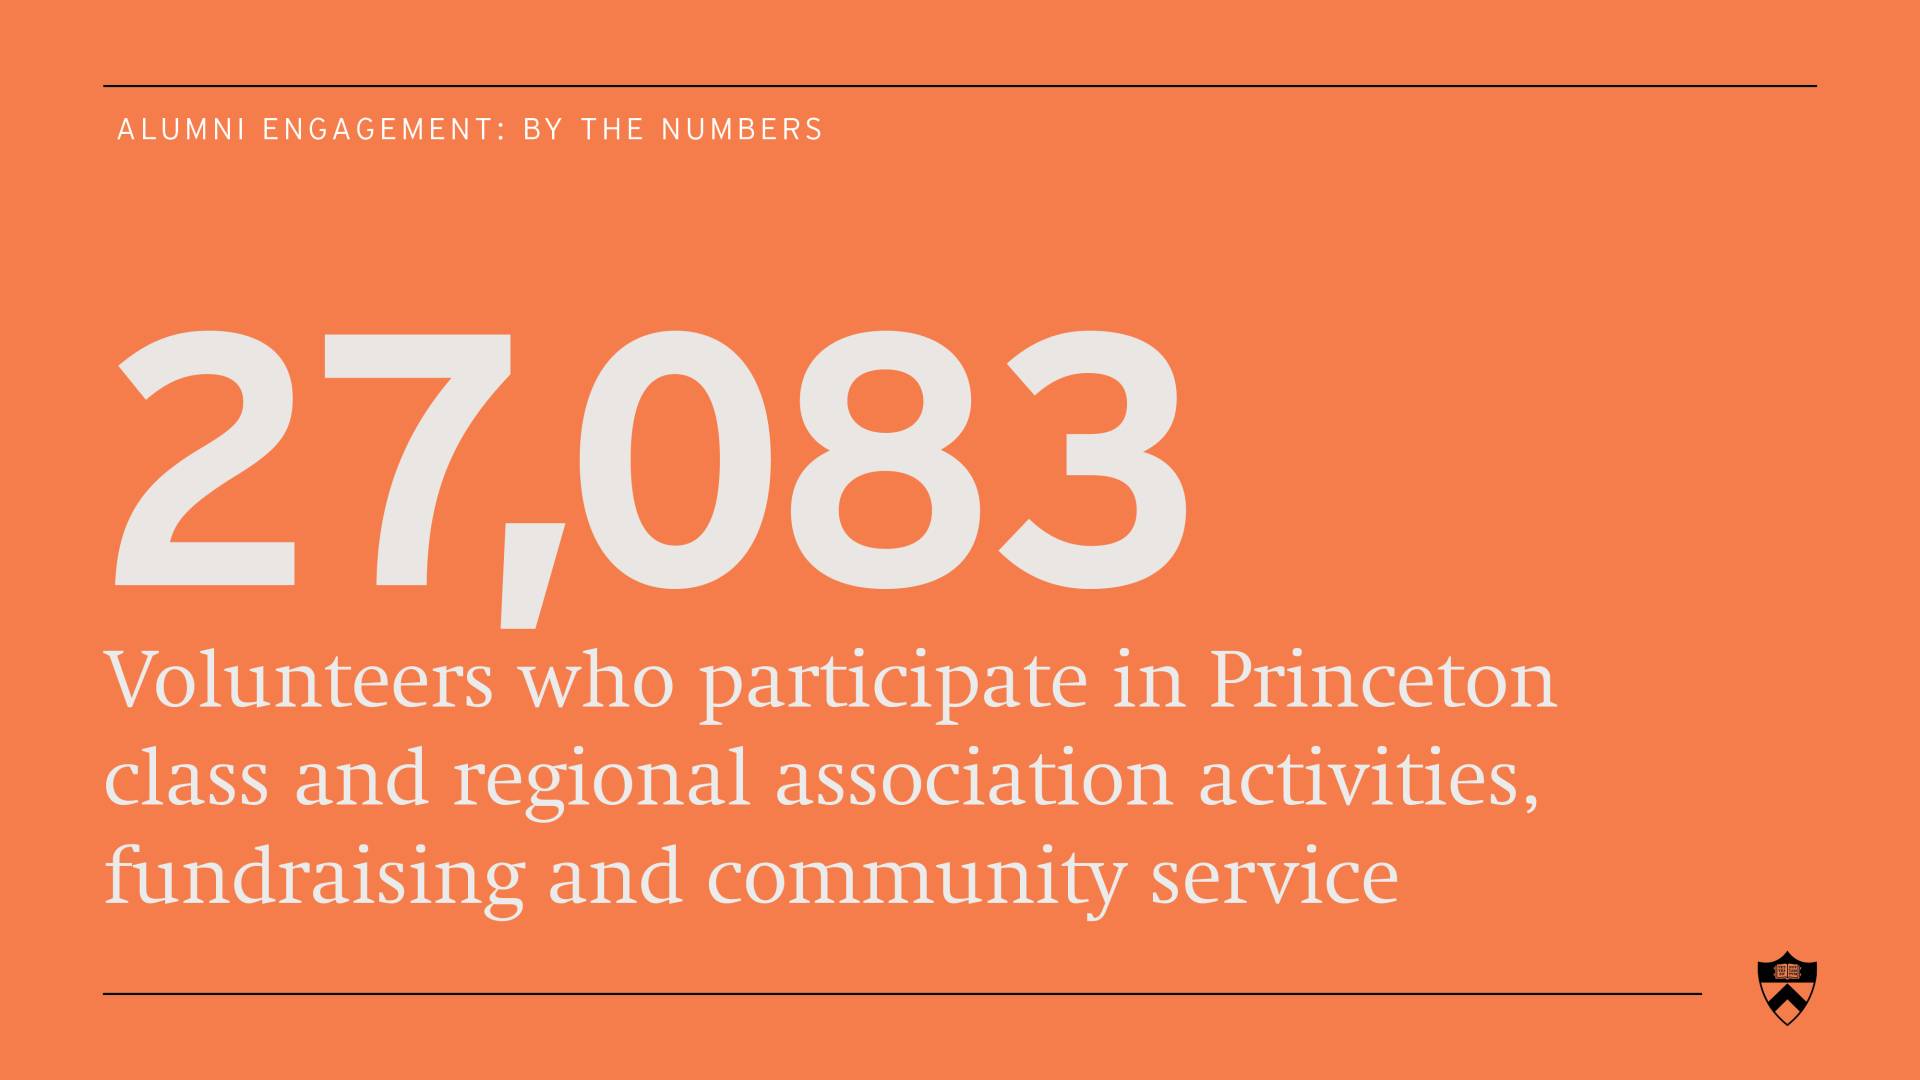 Volunteers who participate in Princeton class and regional association activities, fundraising and community service: 27,083